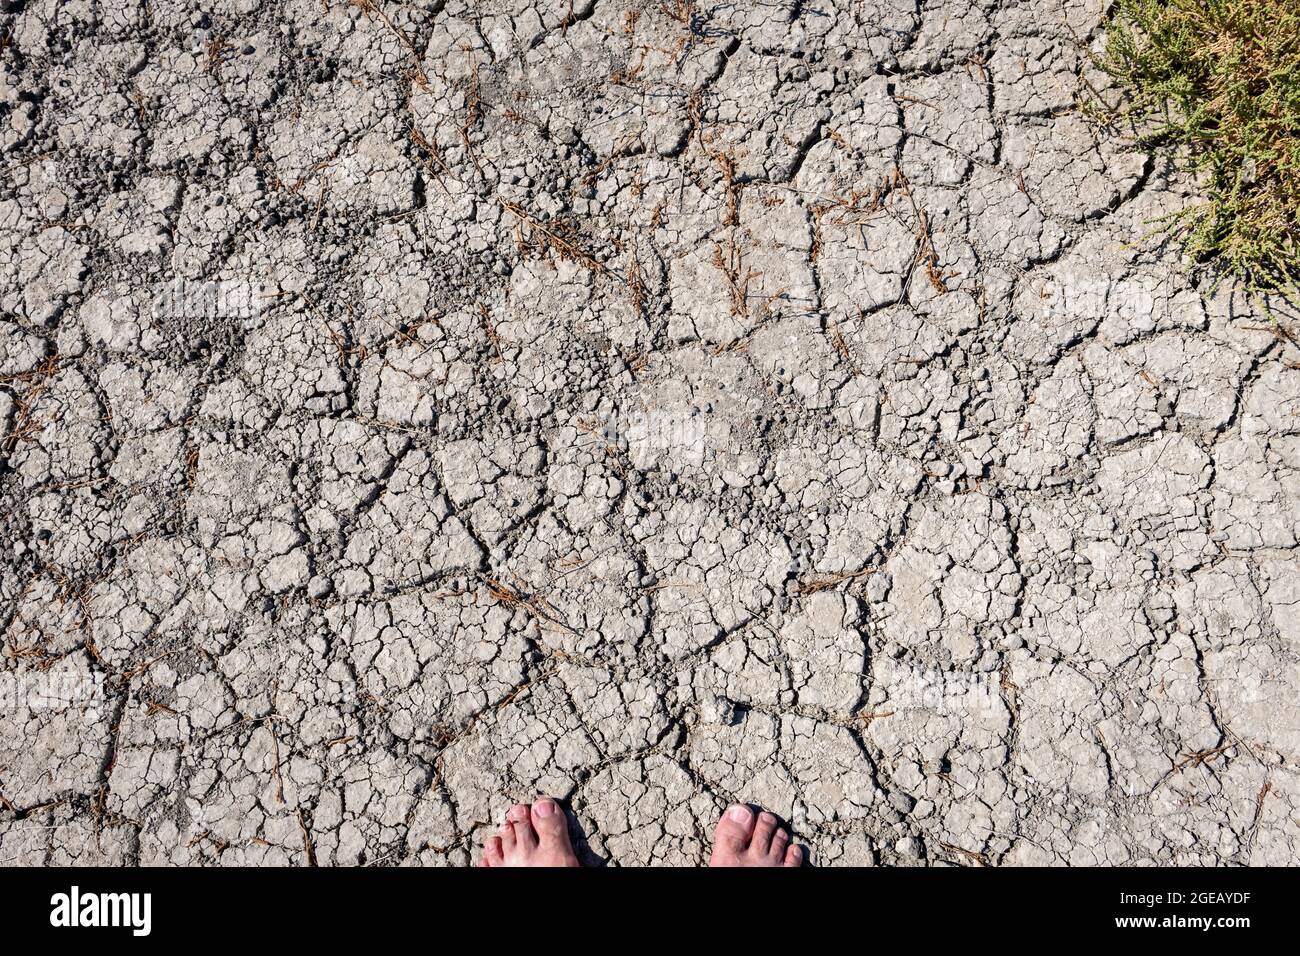 Cracked earth with dying plants. Drought. Climate change. Stock Photo